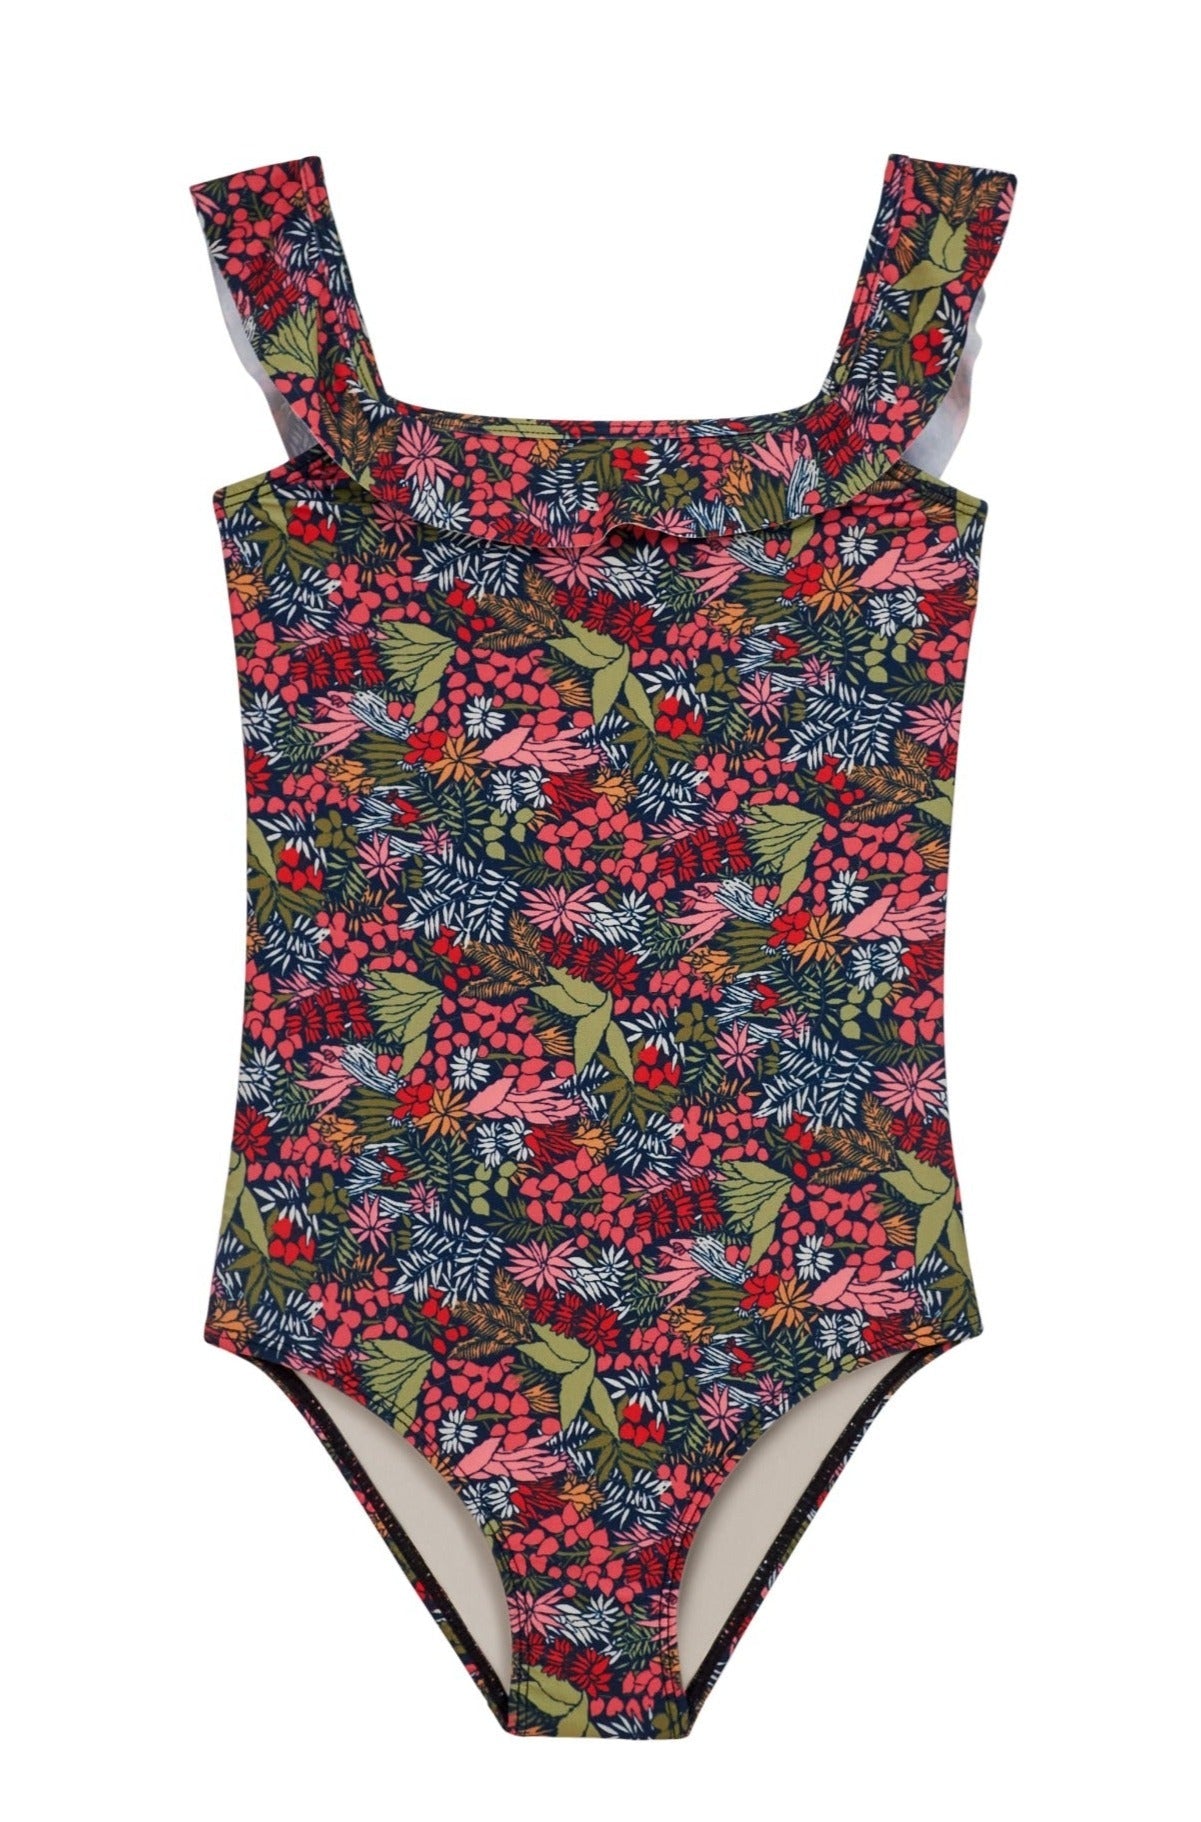 Little Sweet Pea One-Piece Swimsuit by Hermoza – Support Herstory